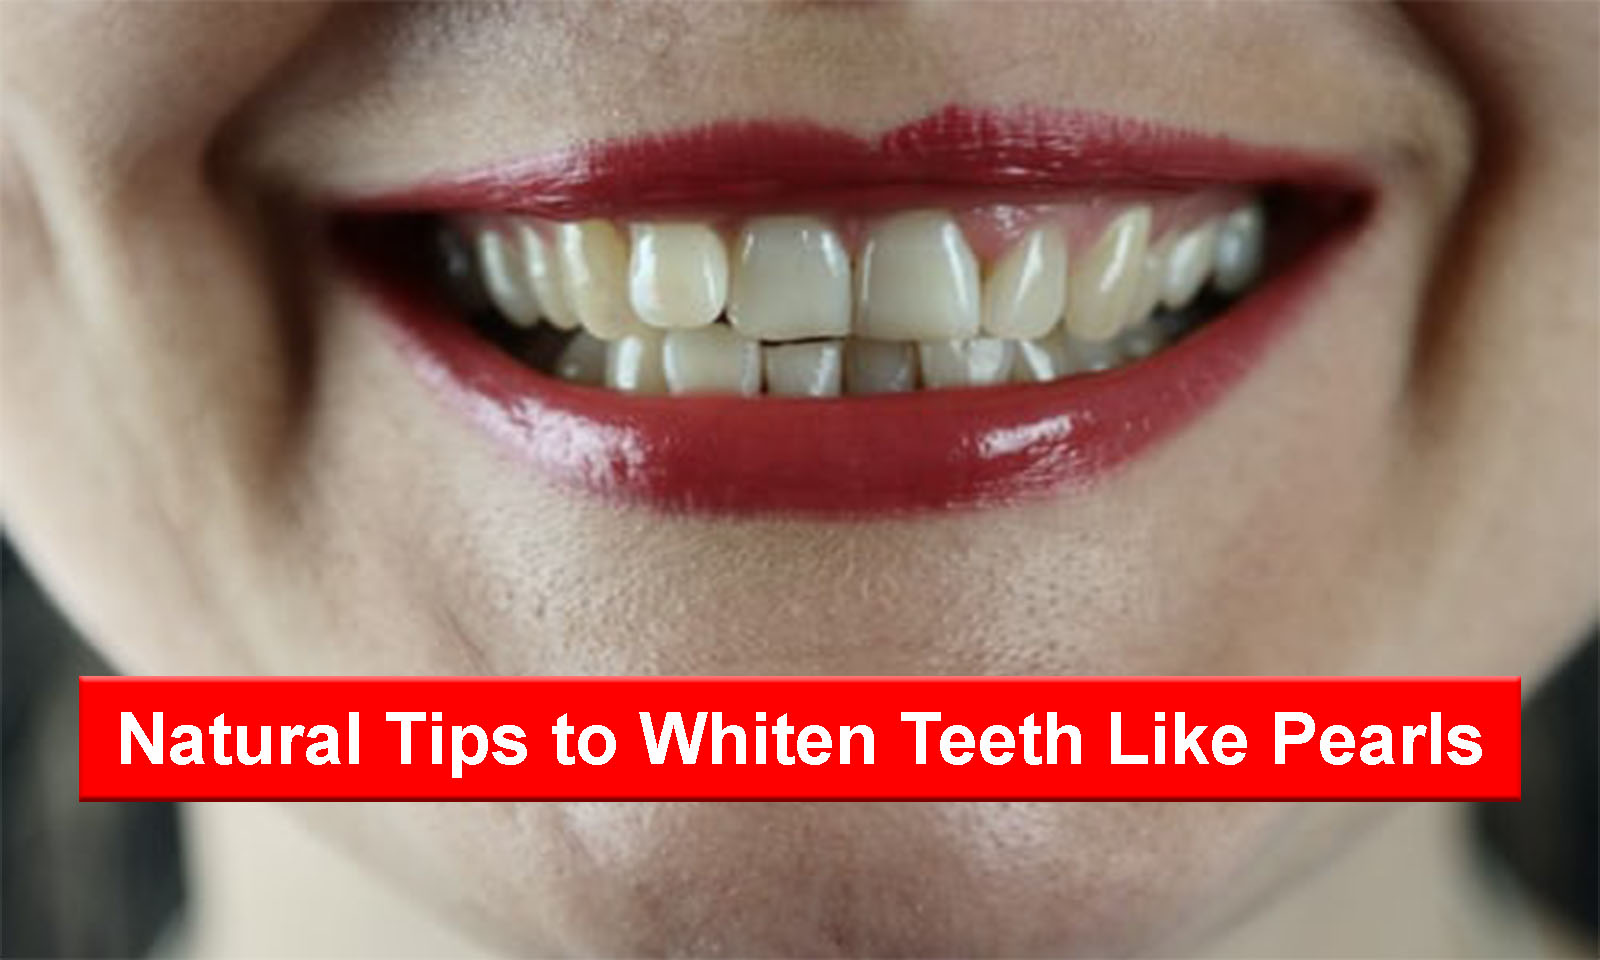 Natural tips to whiten teeth like pearls